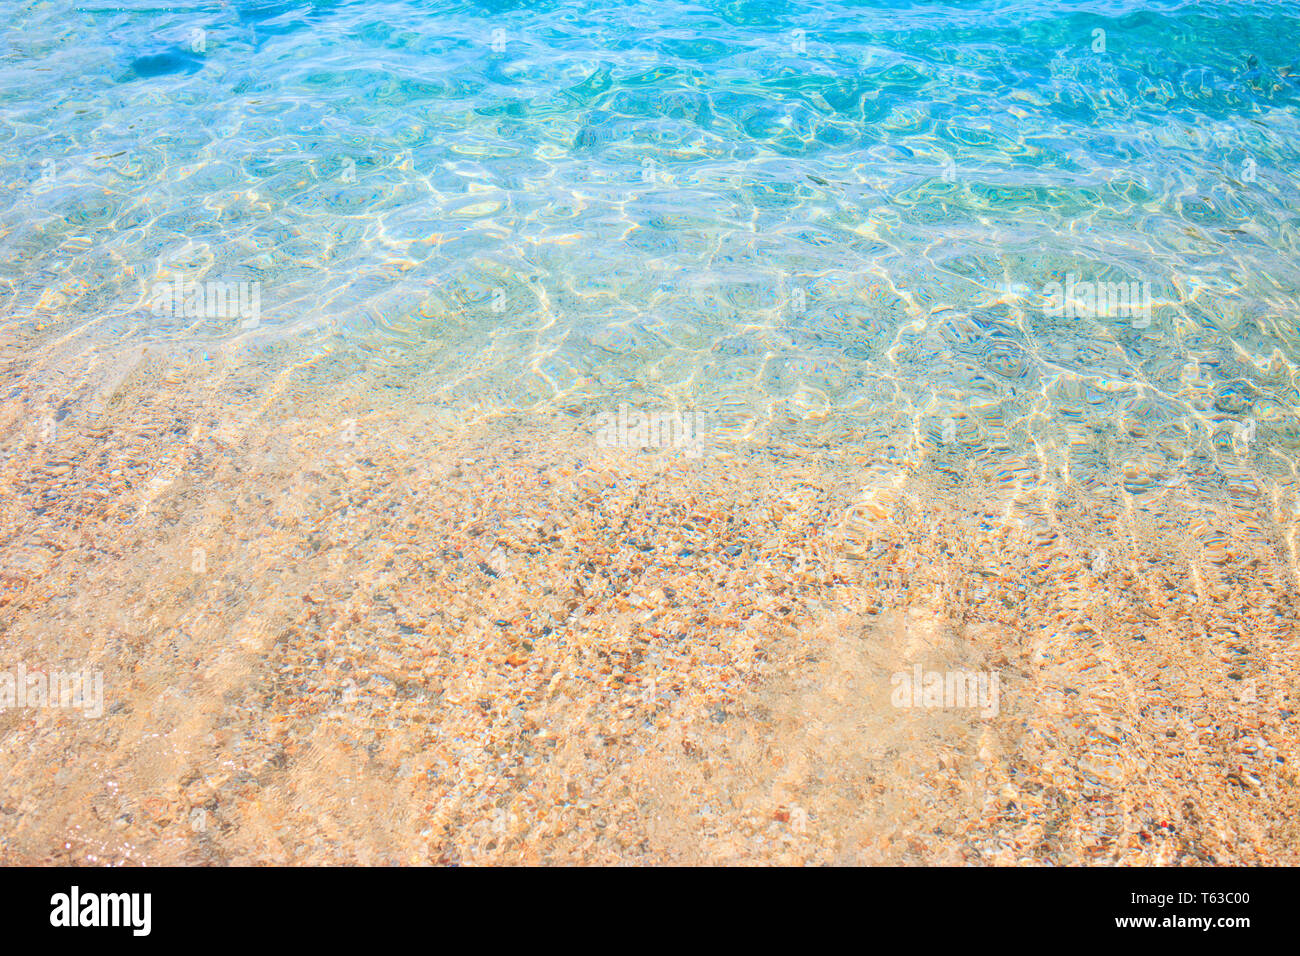 Crystal clear turquoise water near coastline. Stock Photo